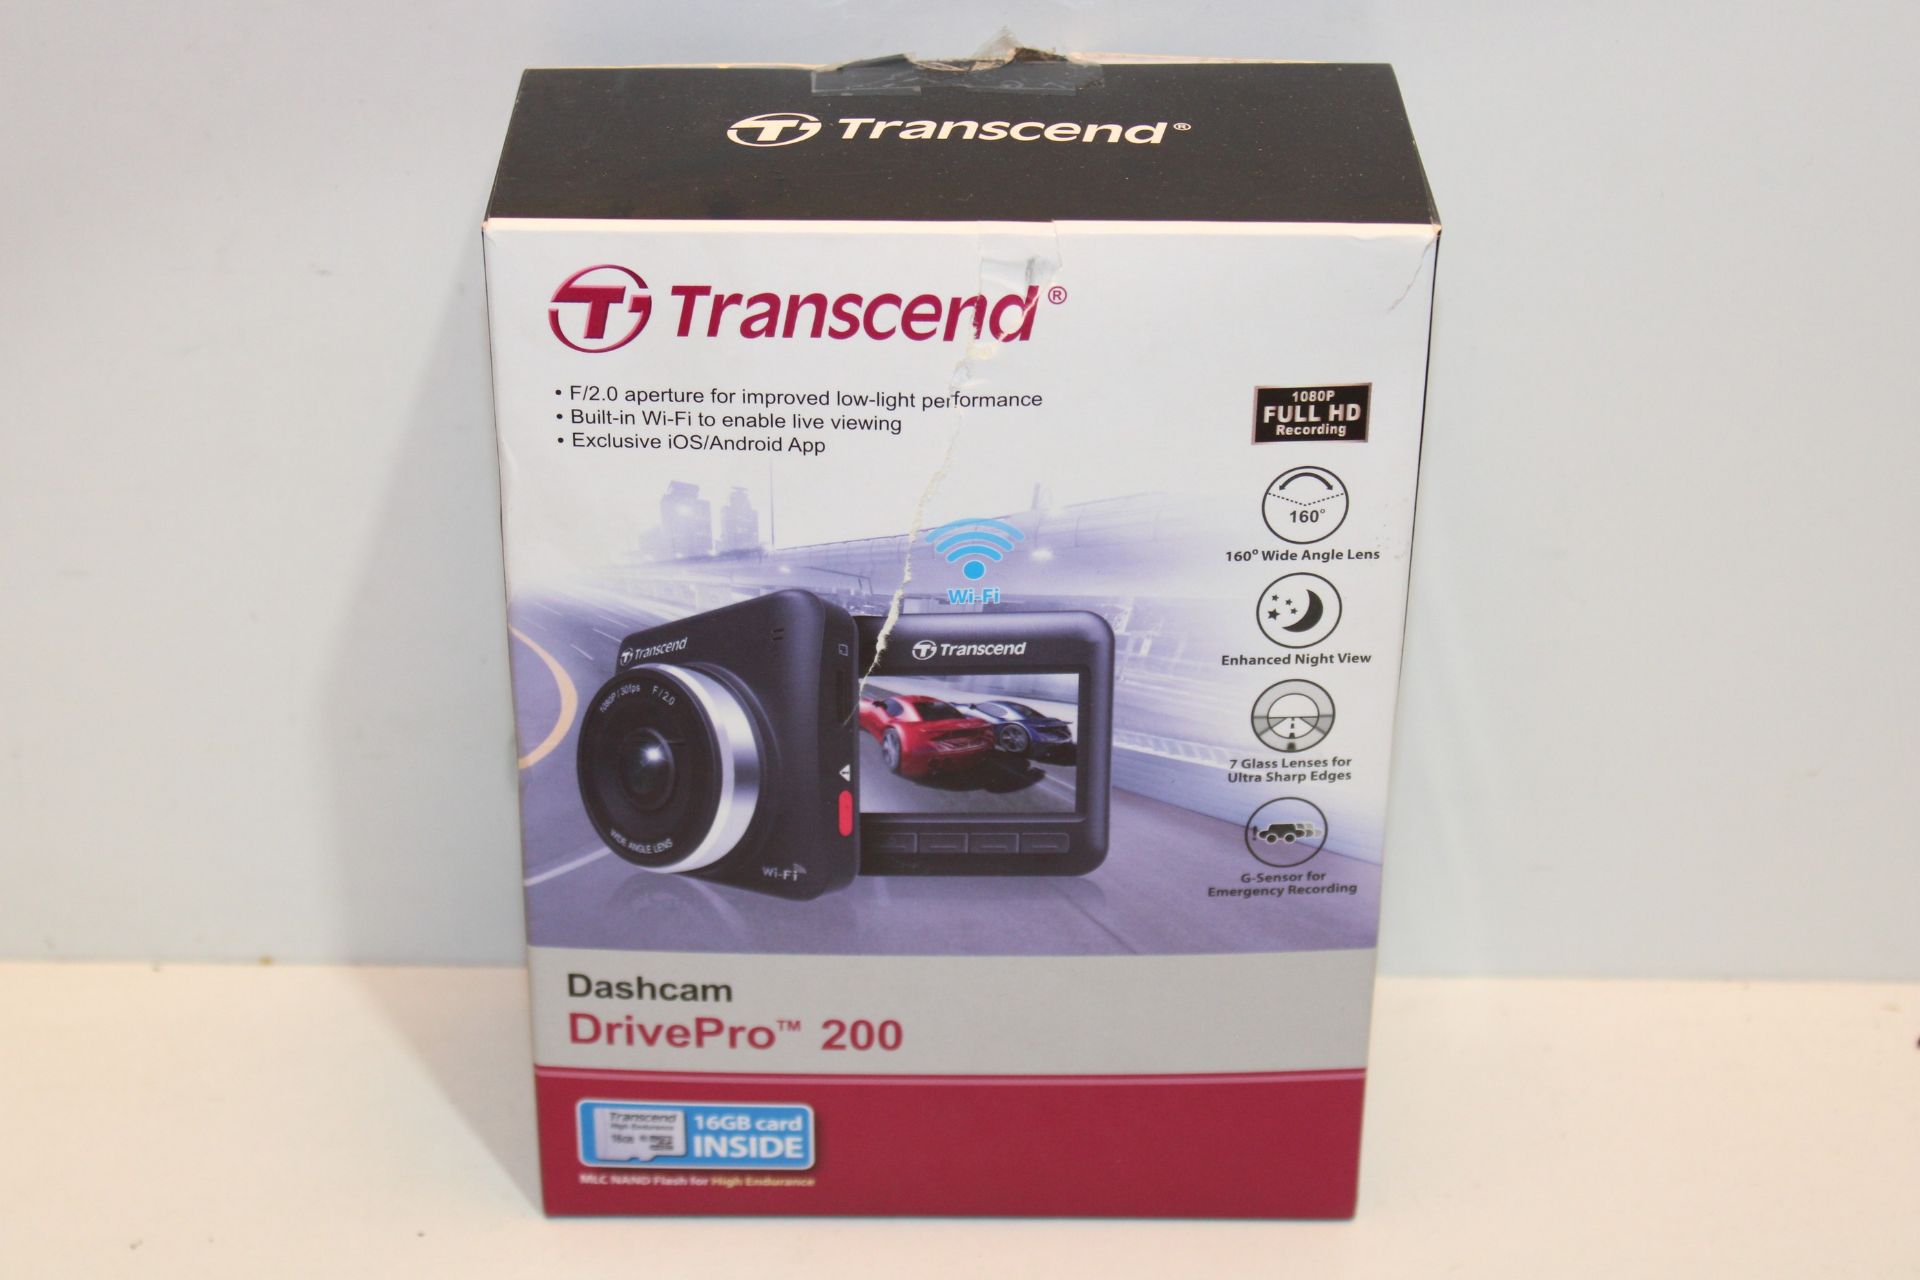 RRP £66.94 Transcend 16GB DrivePro 200 Car Video Recorder with Built-In Wi-Fi